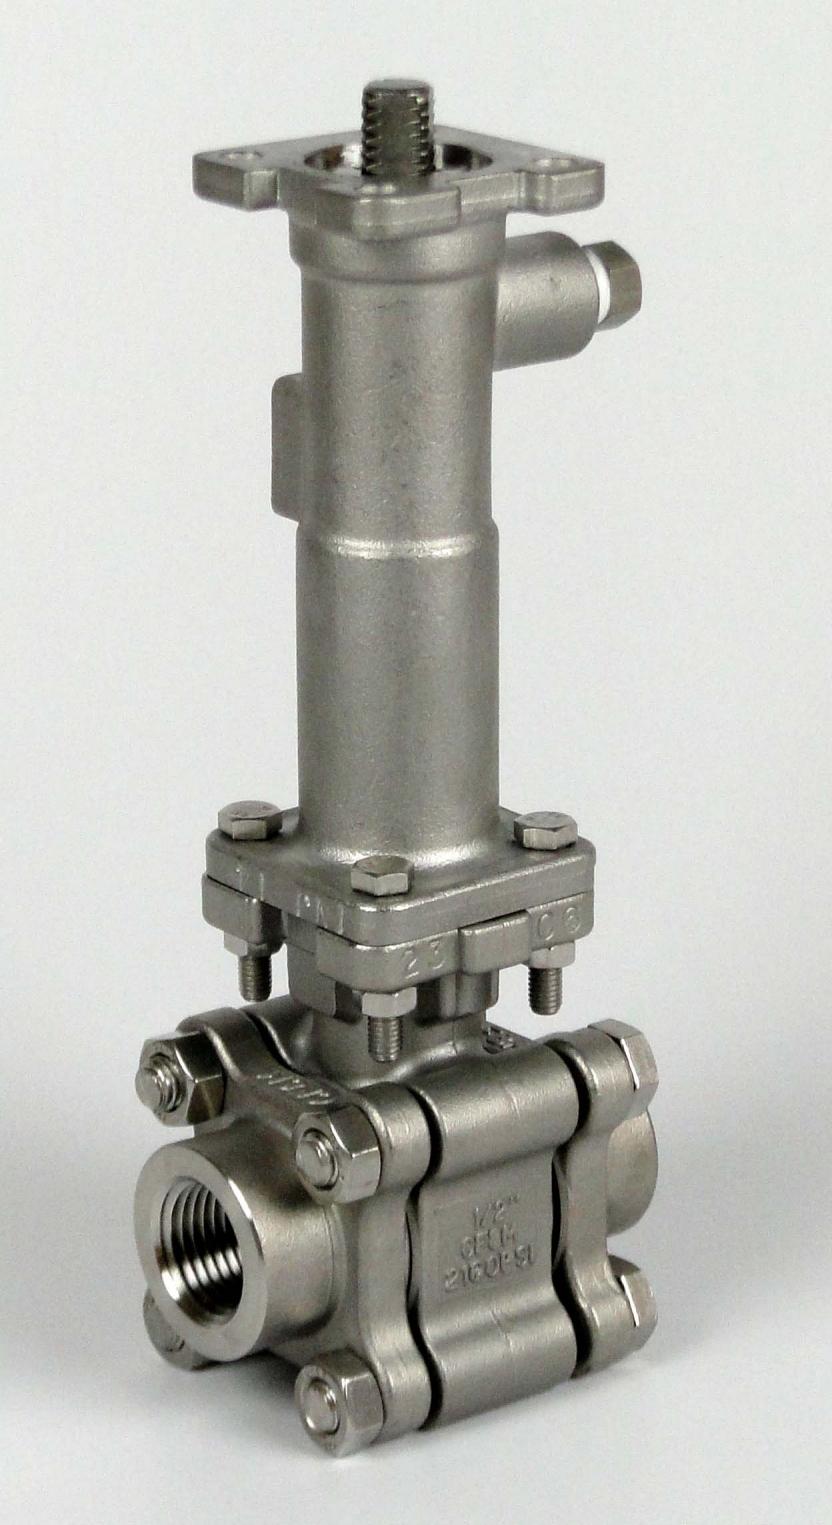 Item 5D-RYOGENI 3-P ryogenic Ball Valve LASS 600/ 00/ 260WOG/ PN 0 SIZE: /2"-" SPEIFIATION * MSS SP-, 2006 cryogenic standard * Suitable for -6 working condition * Body & end caps quality investment